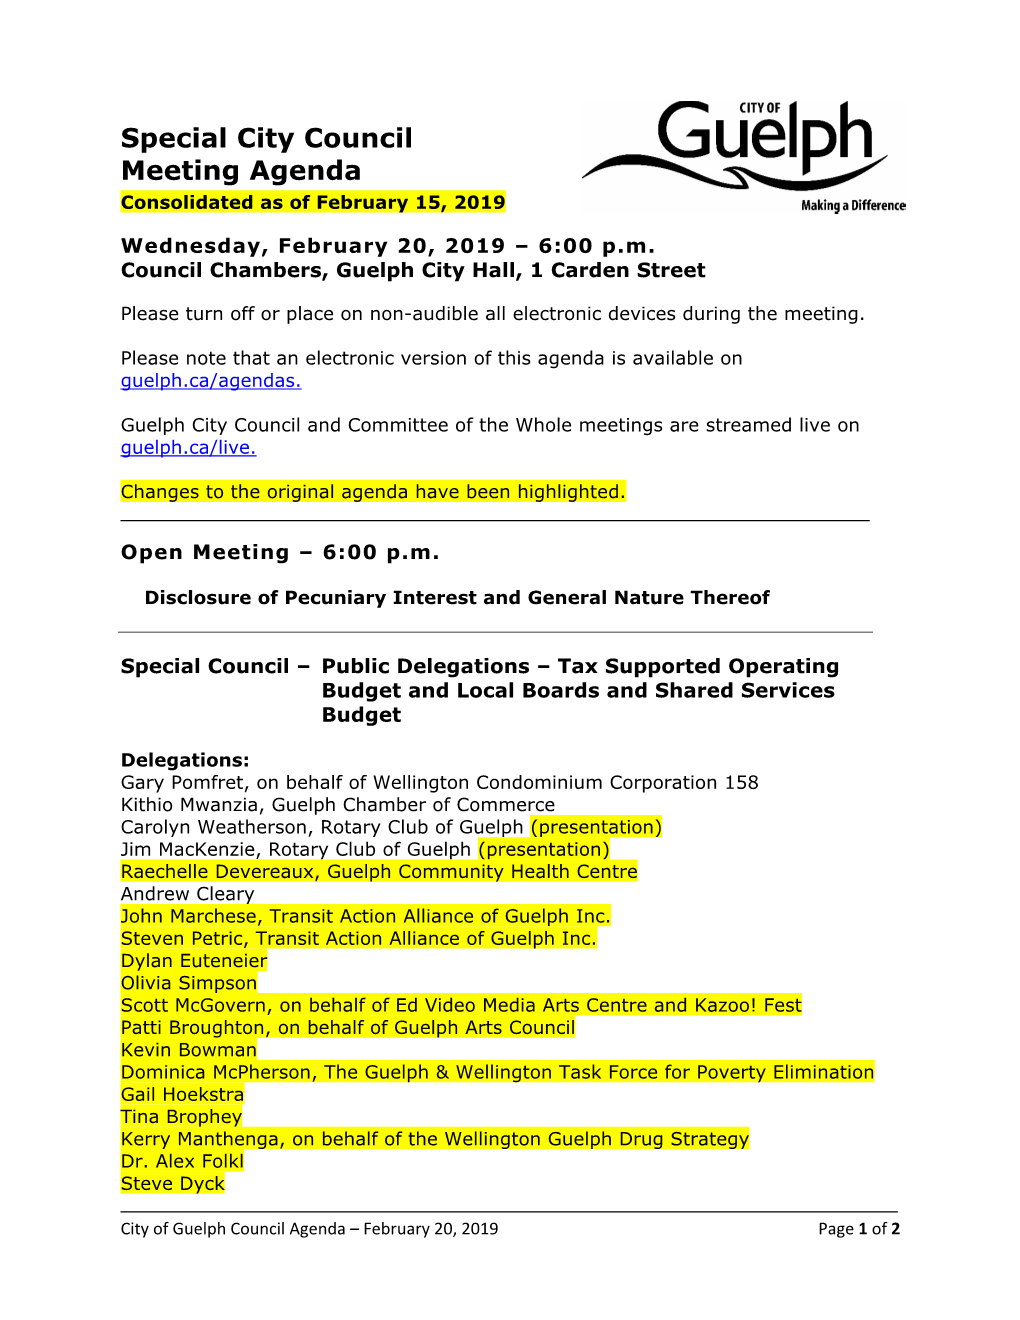 Special City Council Meeting Agenda Consolidated As of February 15, 2019